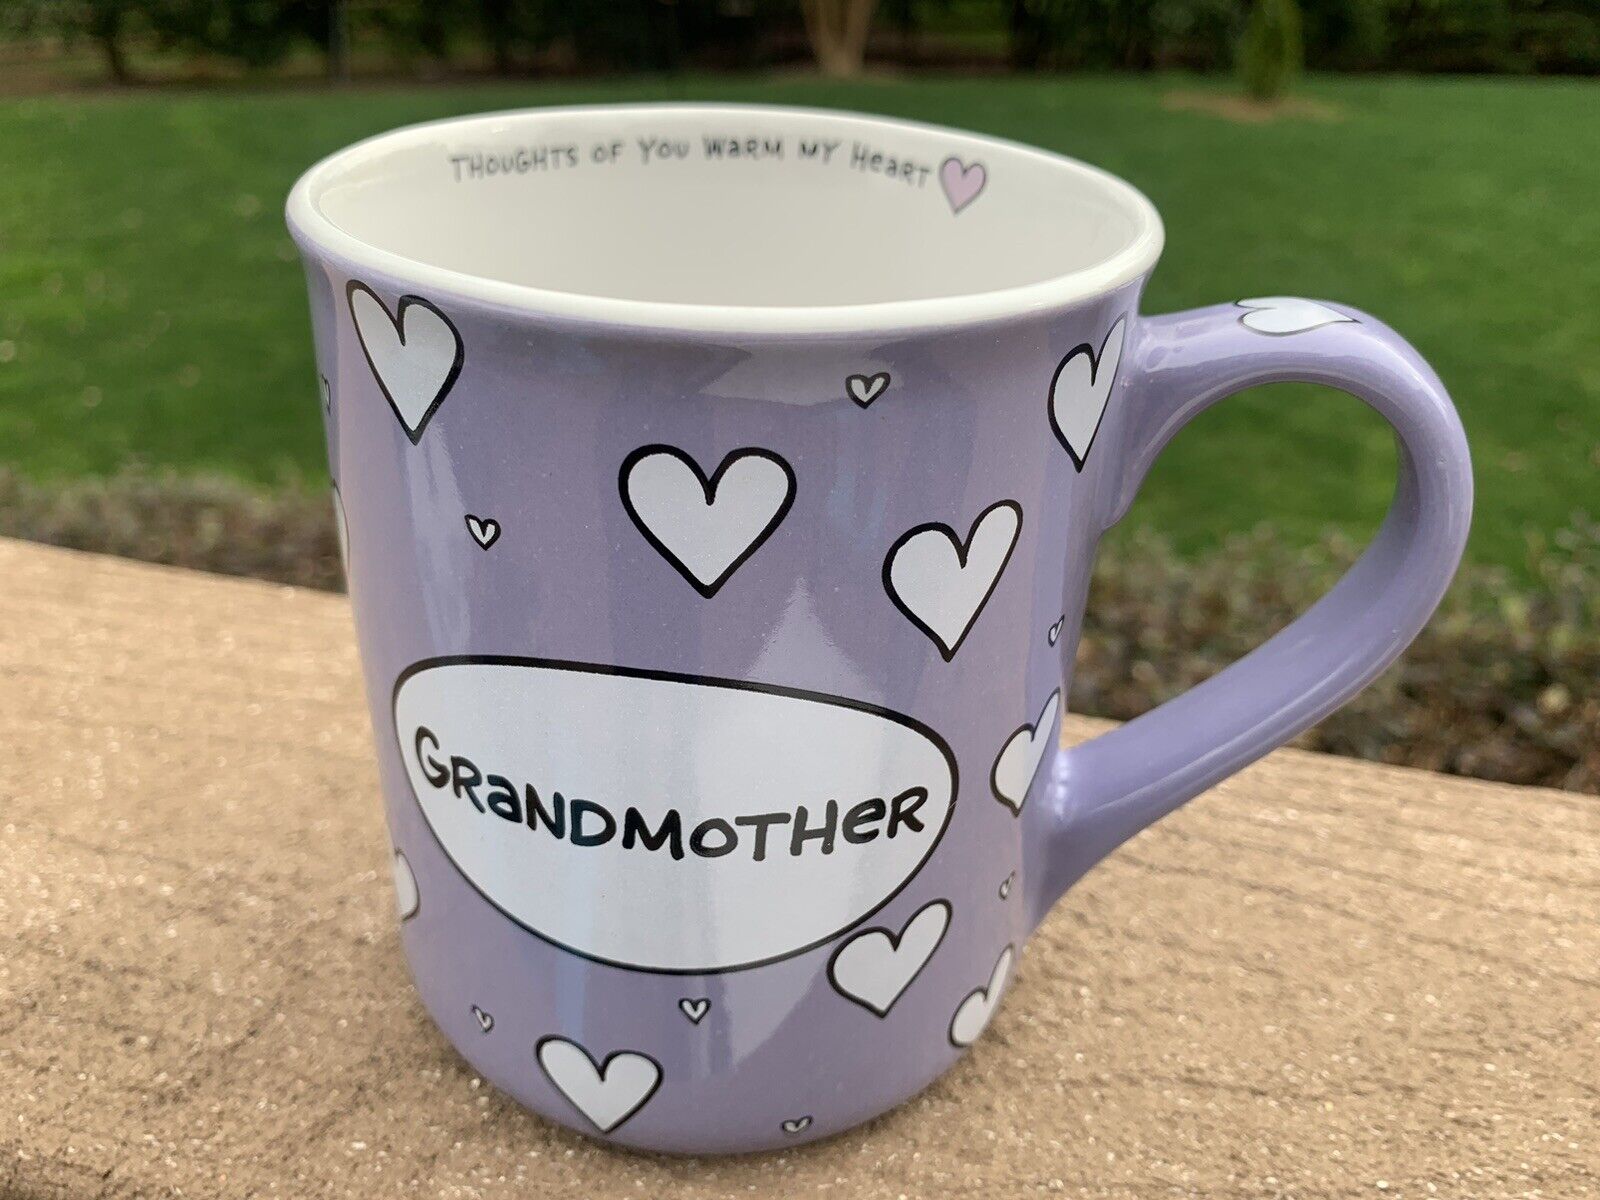 Our Name is Mud Lorrie Veasey Grandmother Coffee Cup \